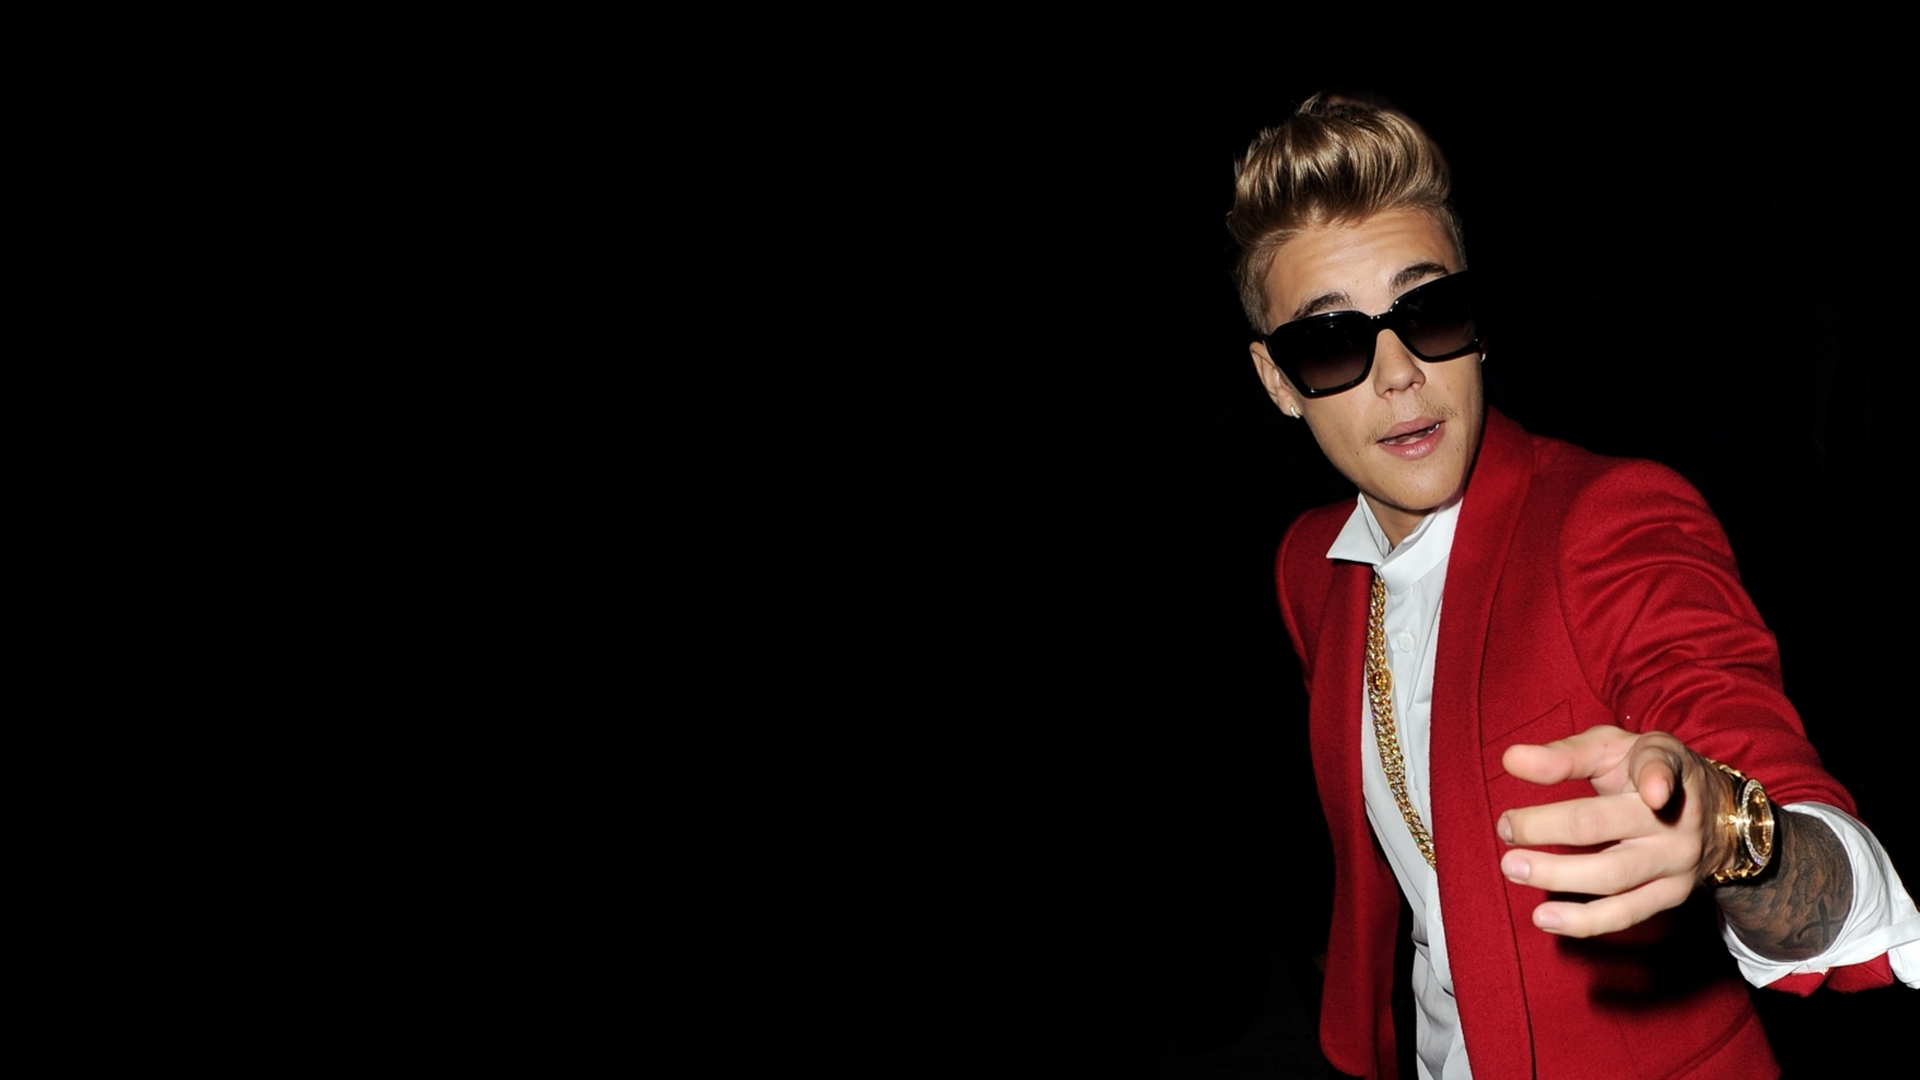 Justin Bieber HD Wallpaper Is This